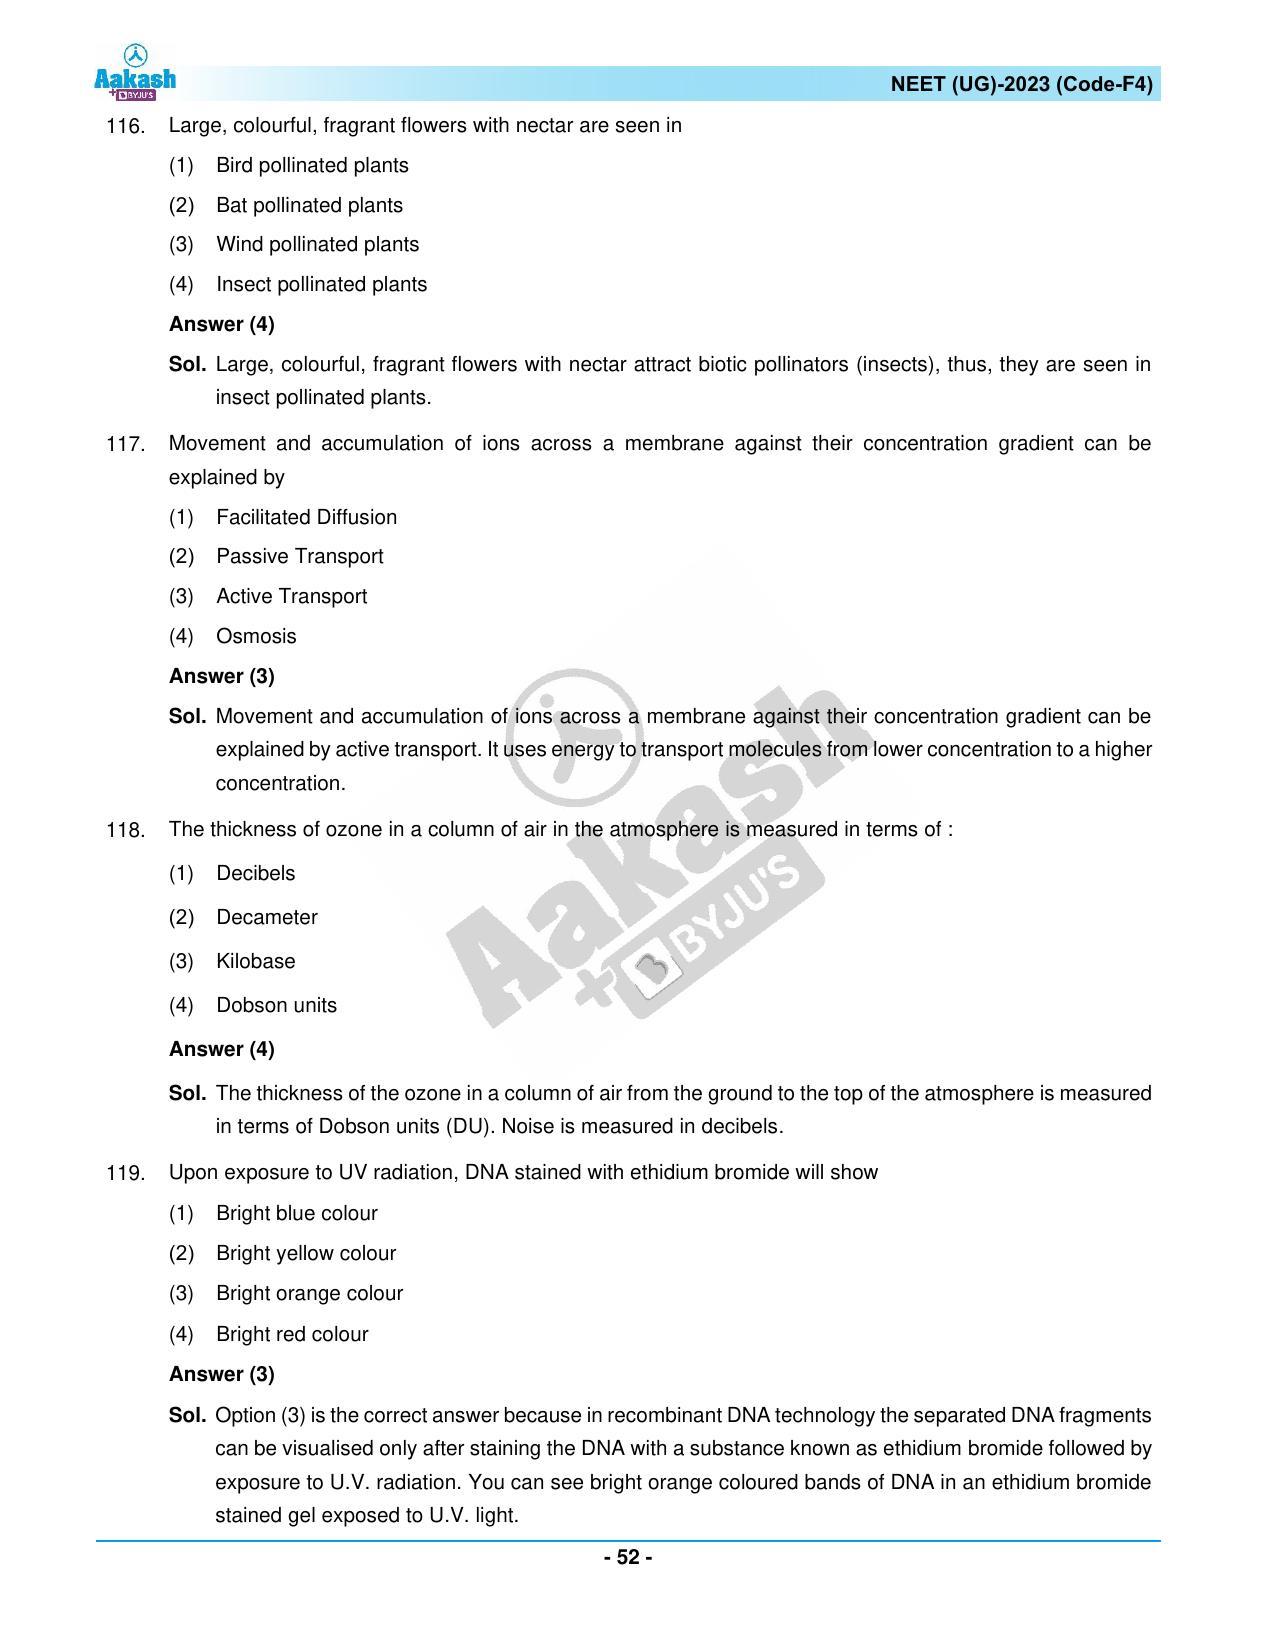 NEET 2023 Question Paper F4 - Page 52